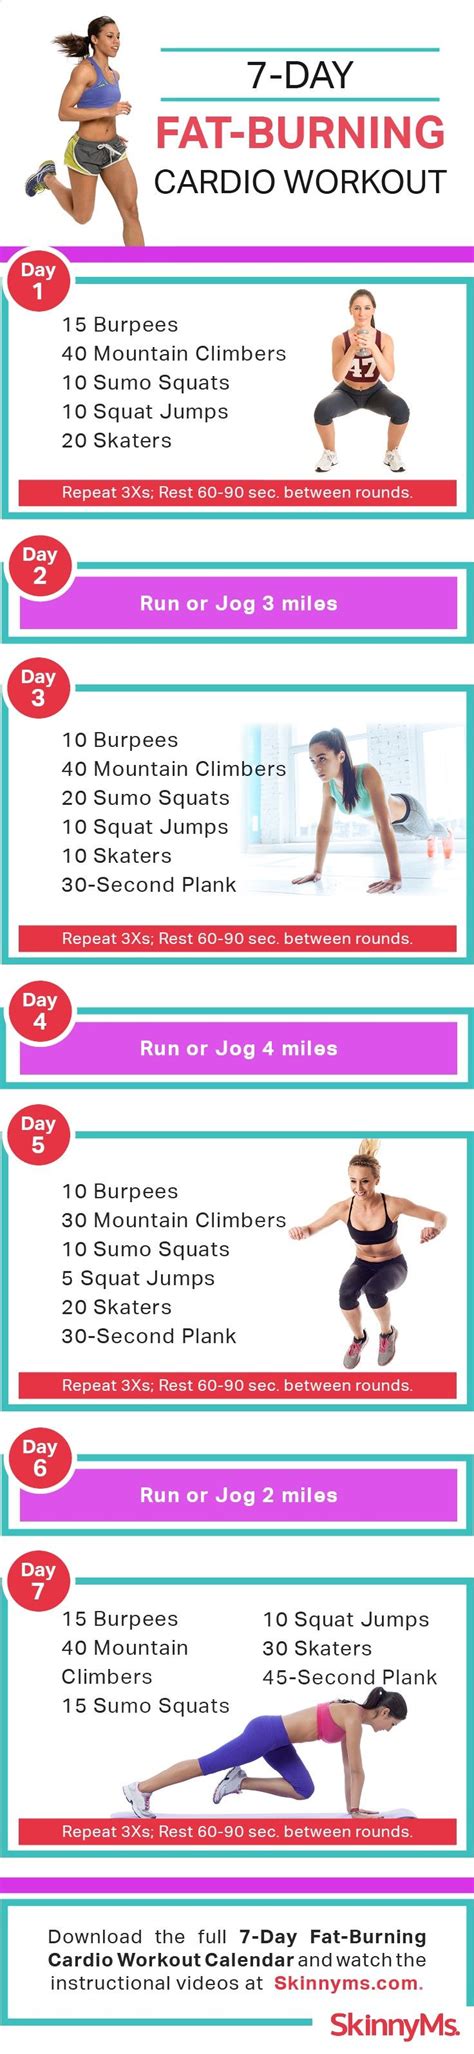 The Best Cardio Workout For Weight Loss A Beginner S Guide Cardio Workout Exercises